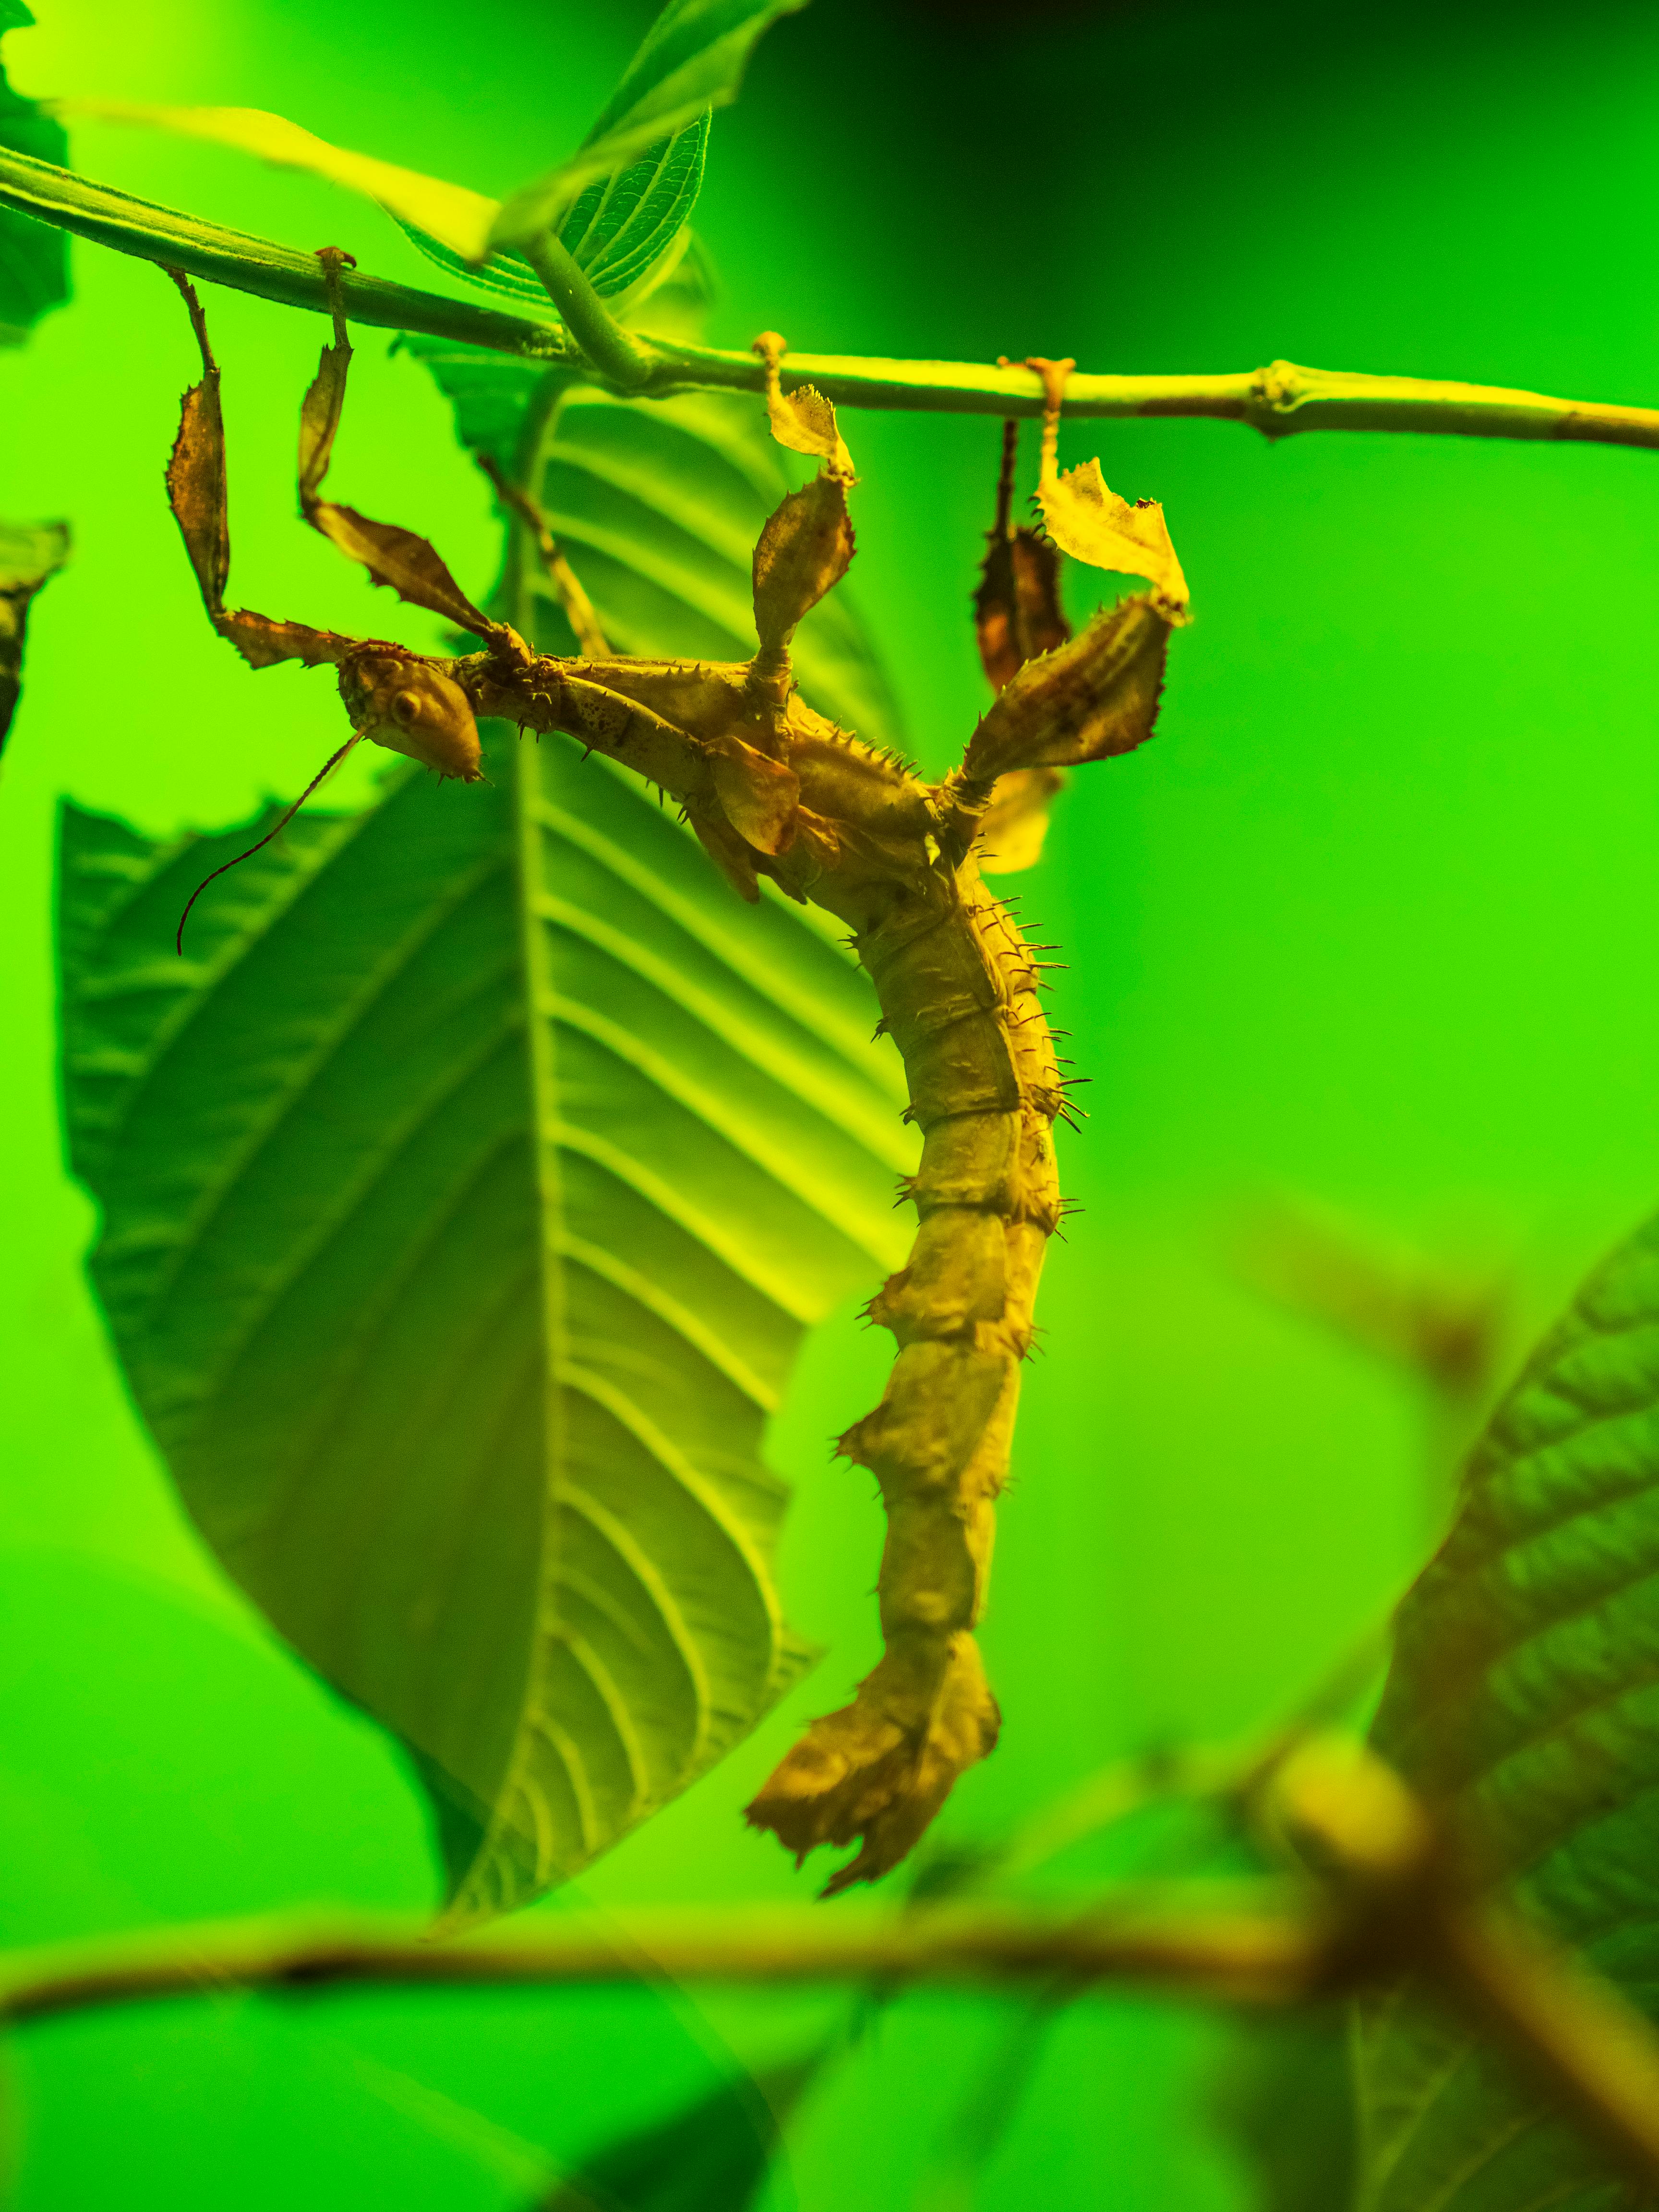 Free stock photo of insect, stick insect